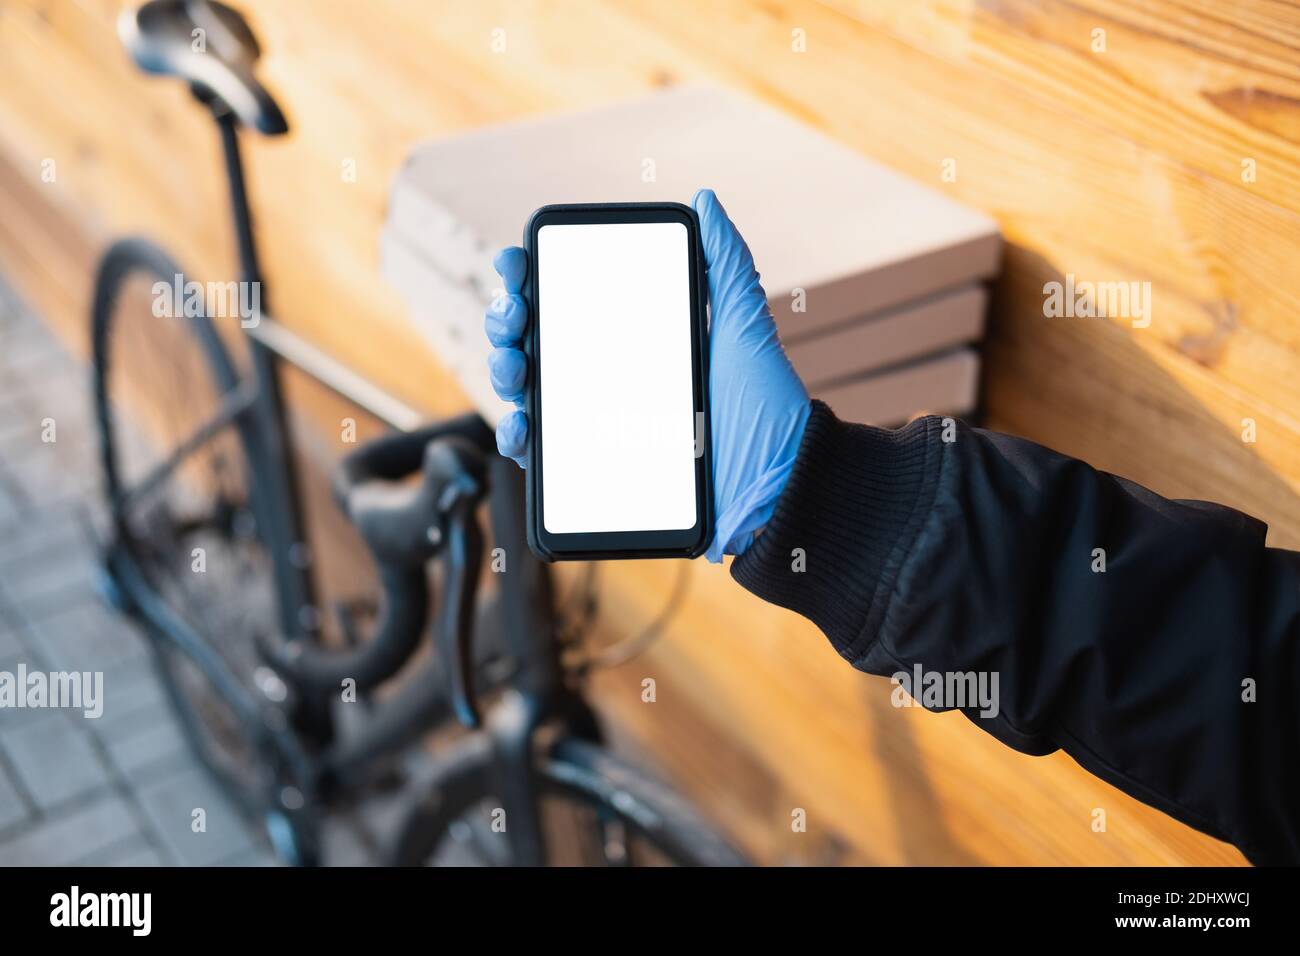 Delivery person standing next to a bicycle with pizza boxes holds a phone with whote screen. Job as a courier, bike messenger profession, part time wo Stock Photo